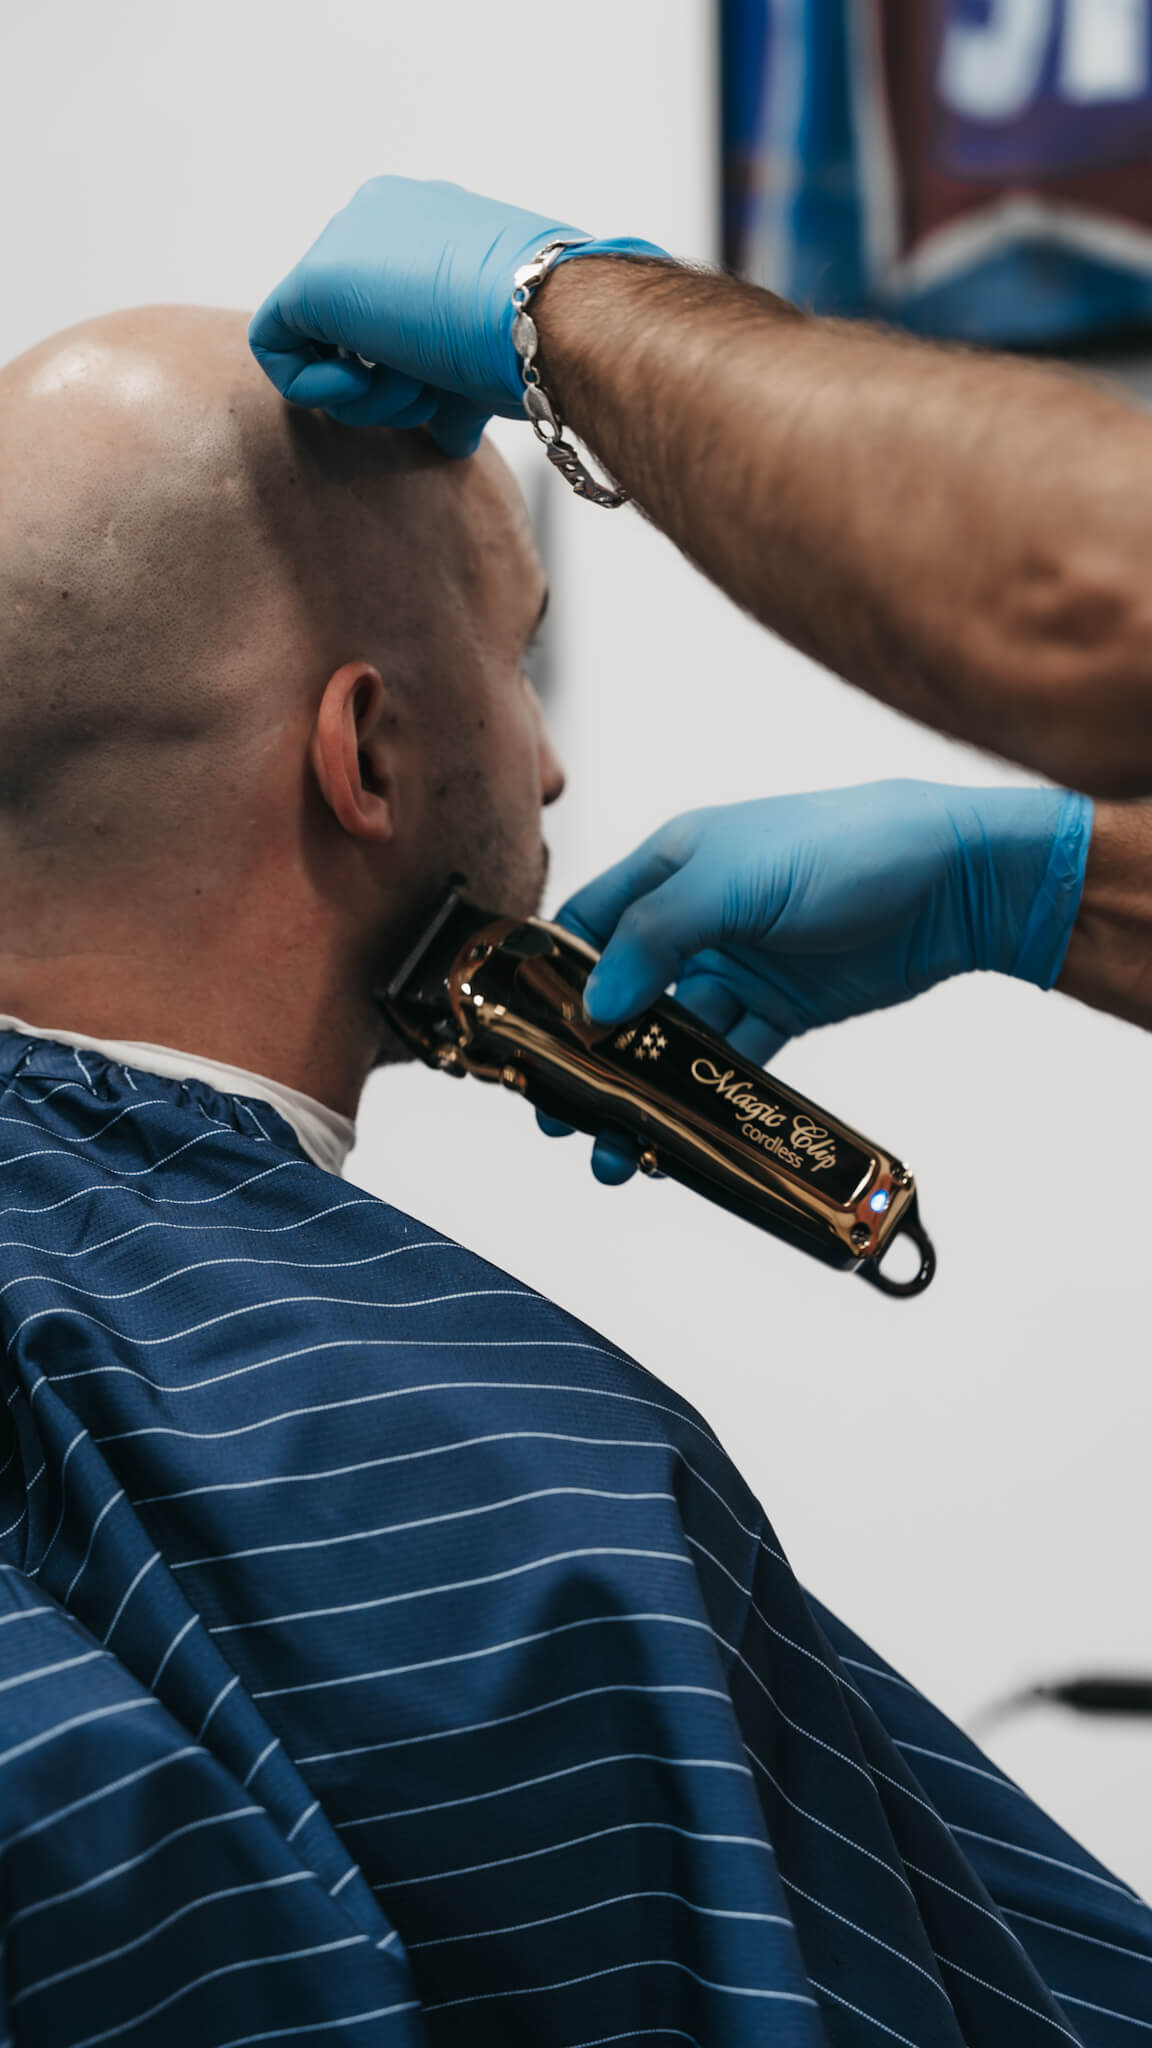 Barber shaving a client with a trimmer, close up shot